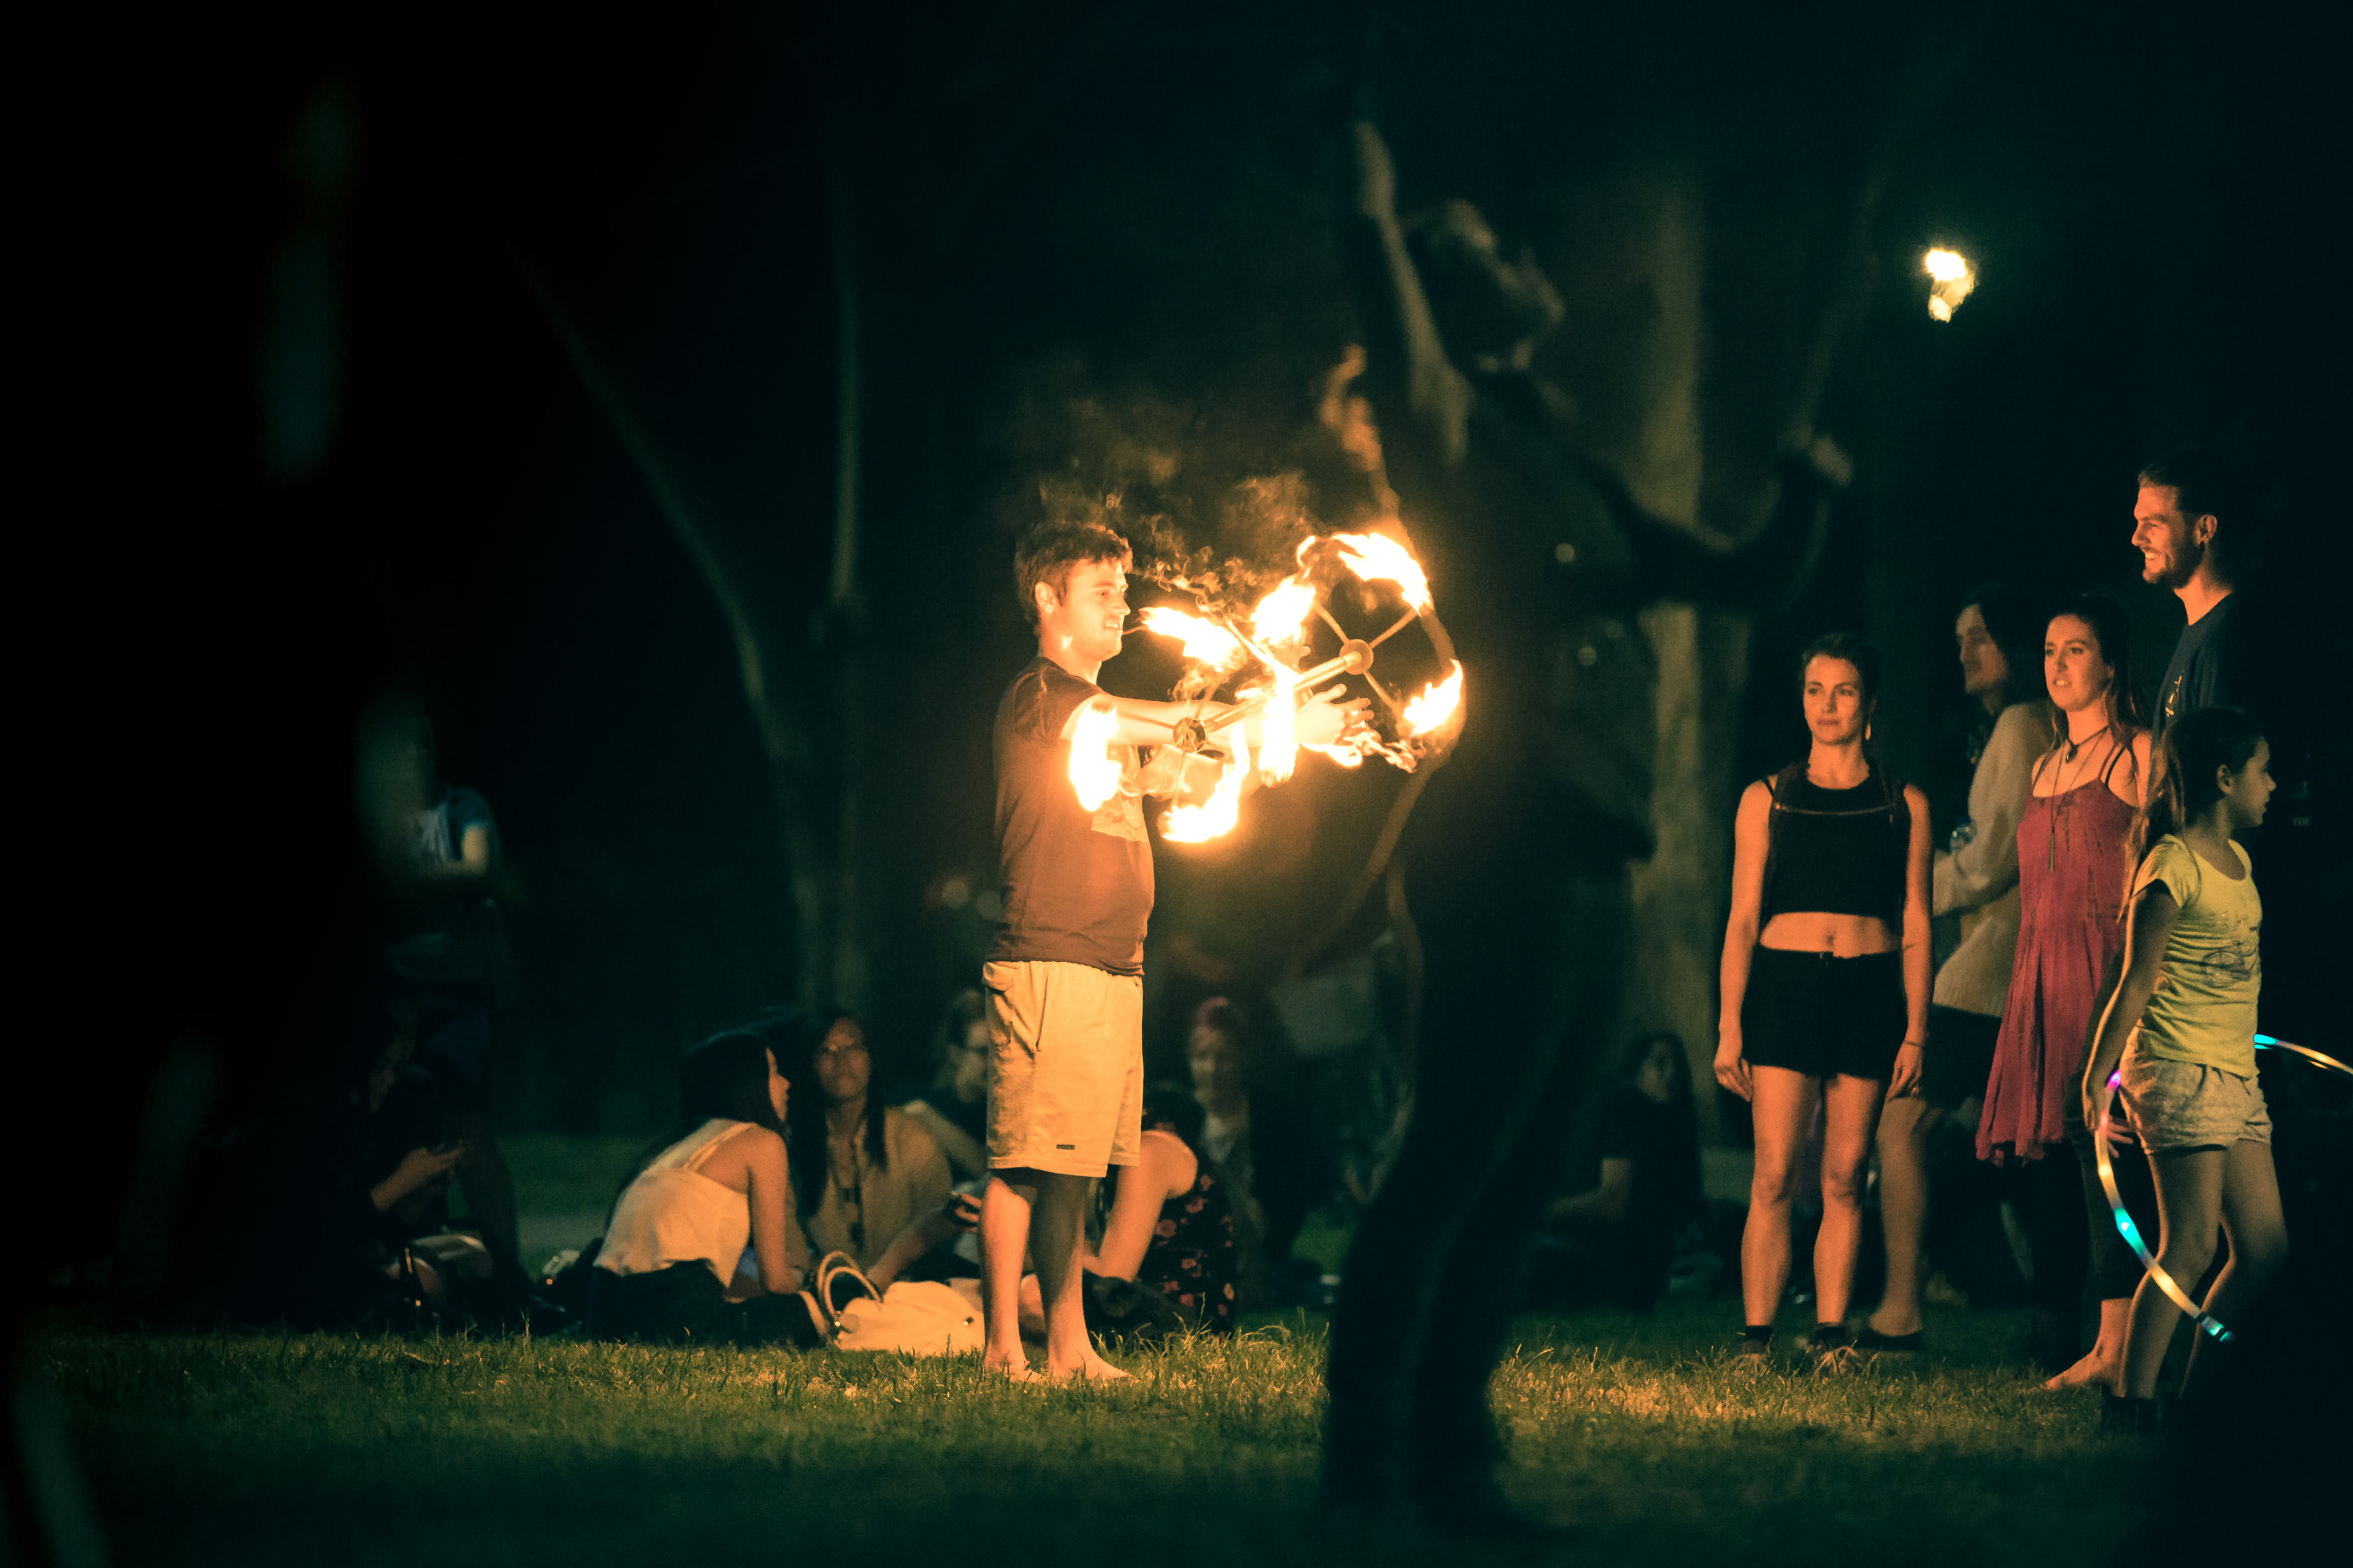 Newtown Fire Twirling with a Flaming Staff in Camperdown Memorial Park